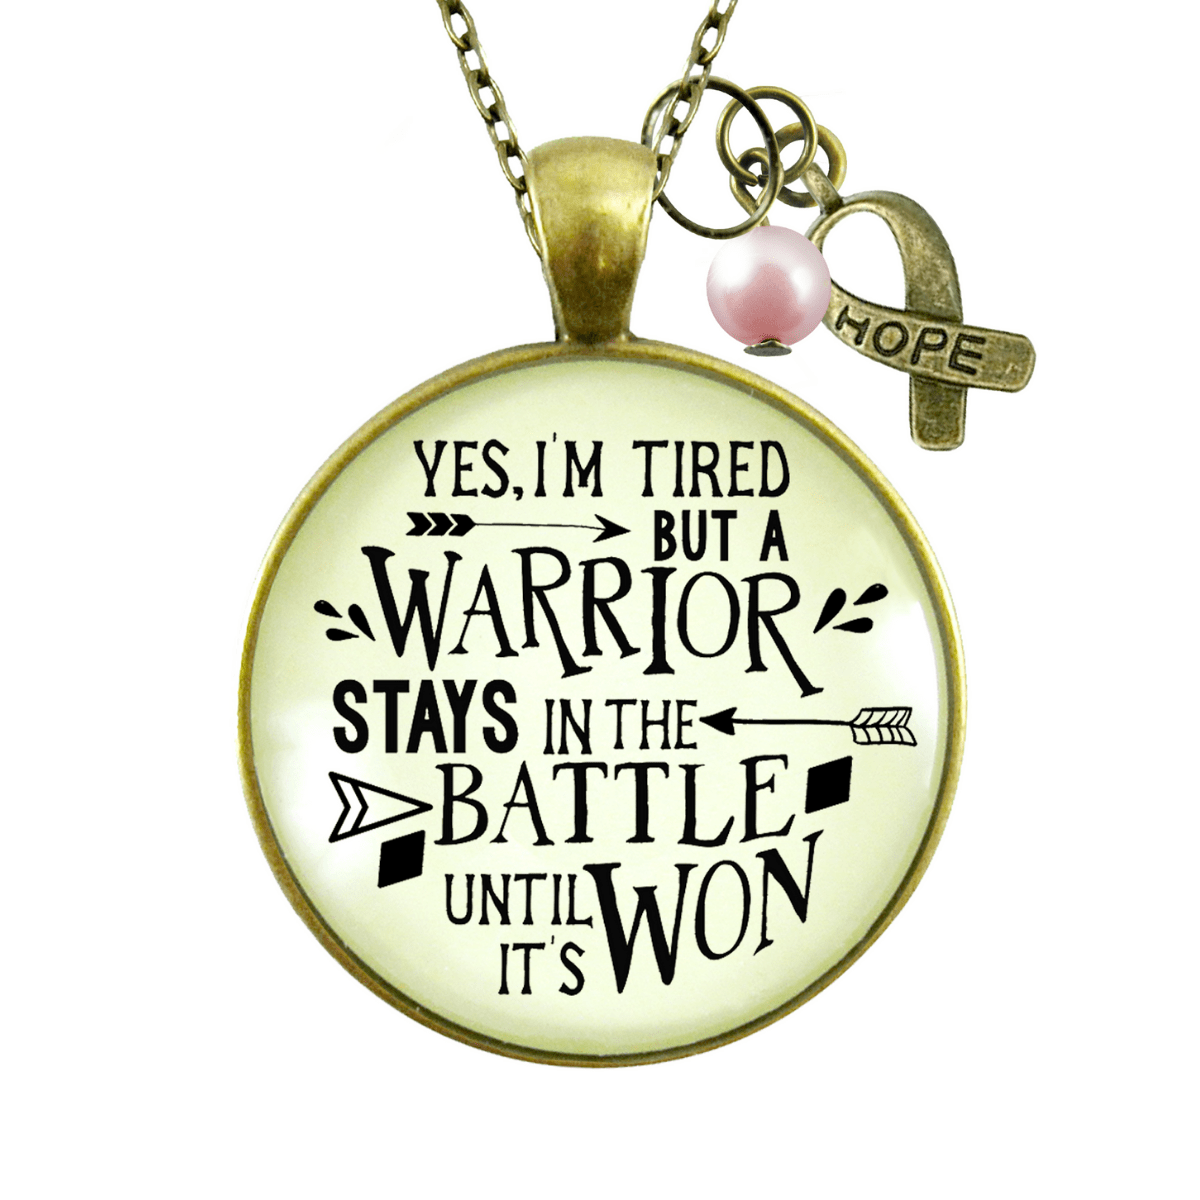 Gutsy Goodness Breast Cancer Necklace Yes I Am Tired But A Warrior Gift Survivor Pink Charm - Gutsy Goodness Handmade Jewelry;Breast Cancer Necklace Yes I Am Tired But A Warrior Gift Survivor Pink Charm - Gutsy Goodness Handmade Jewelry Gifts